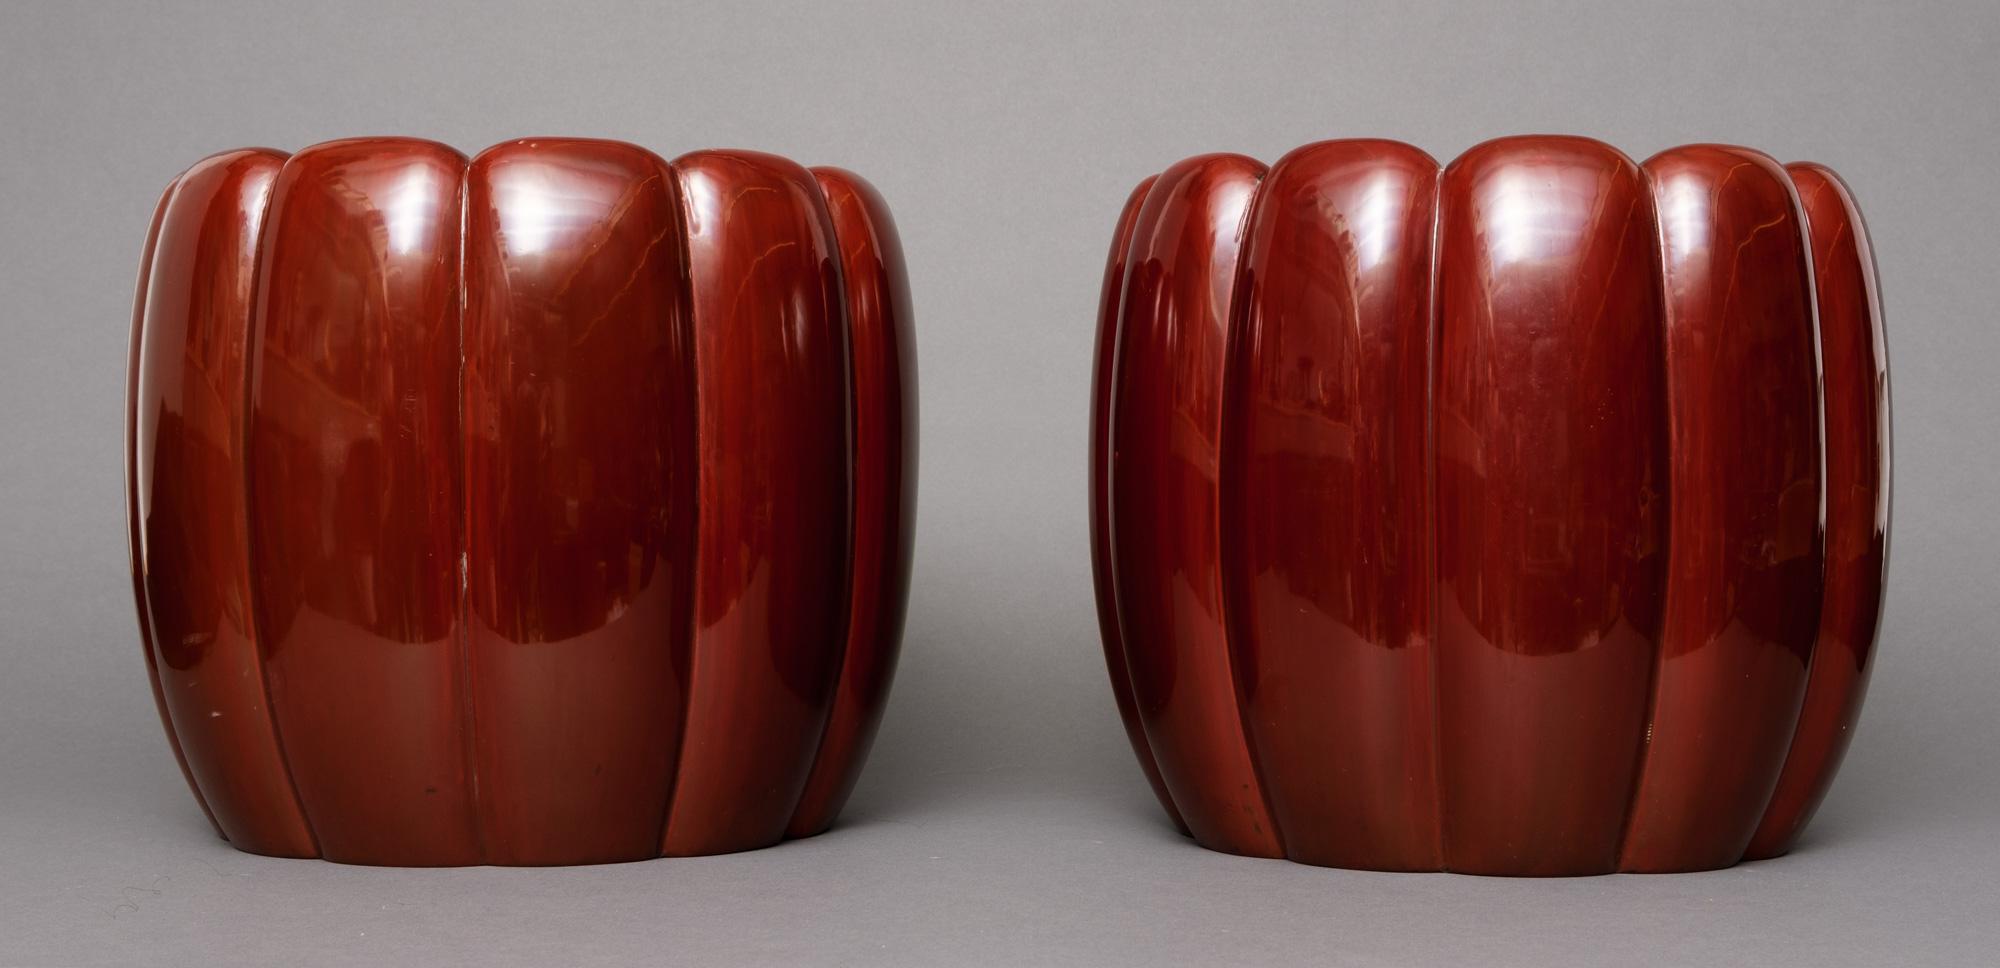 20th Century Pair of Japanese Red Lacquered Hibachi 火鉢 'Fire Bowls' Shaped like Flowers